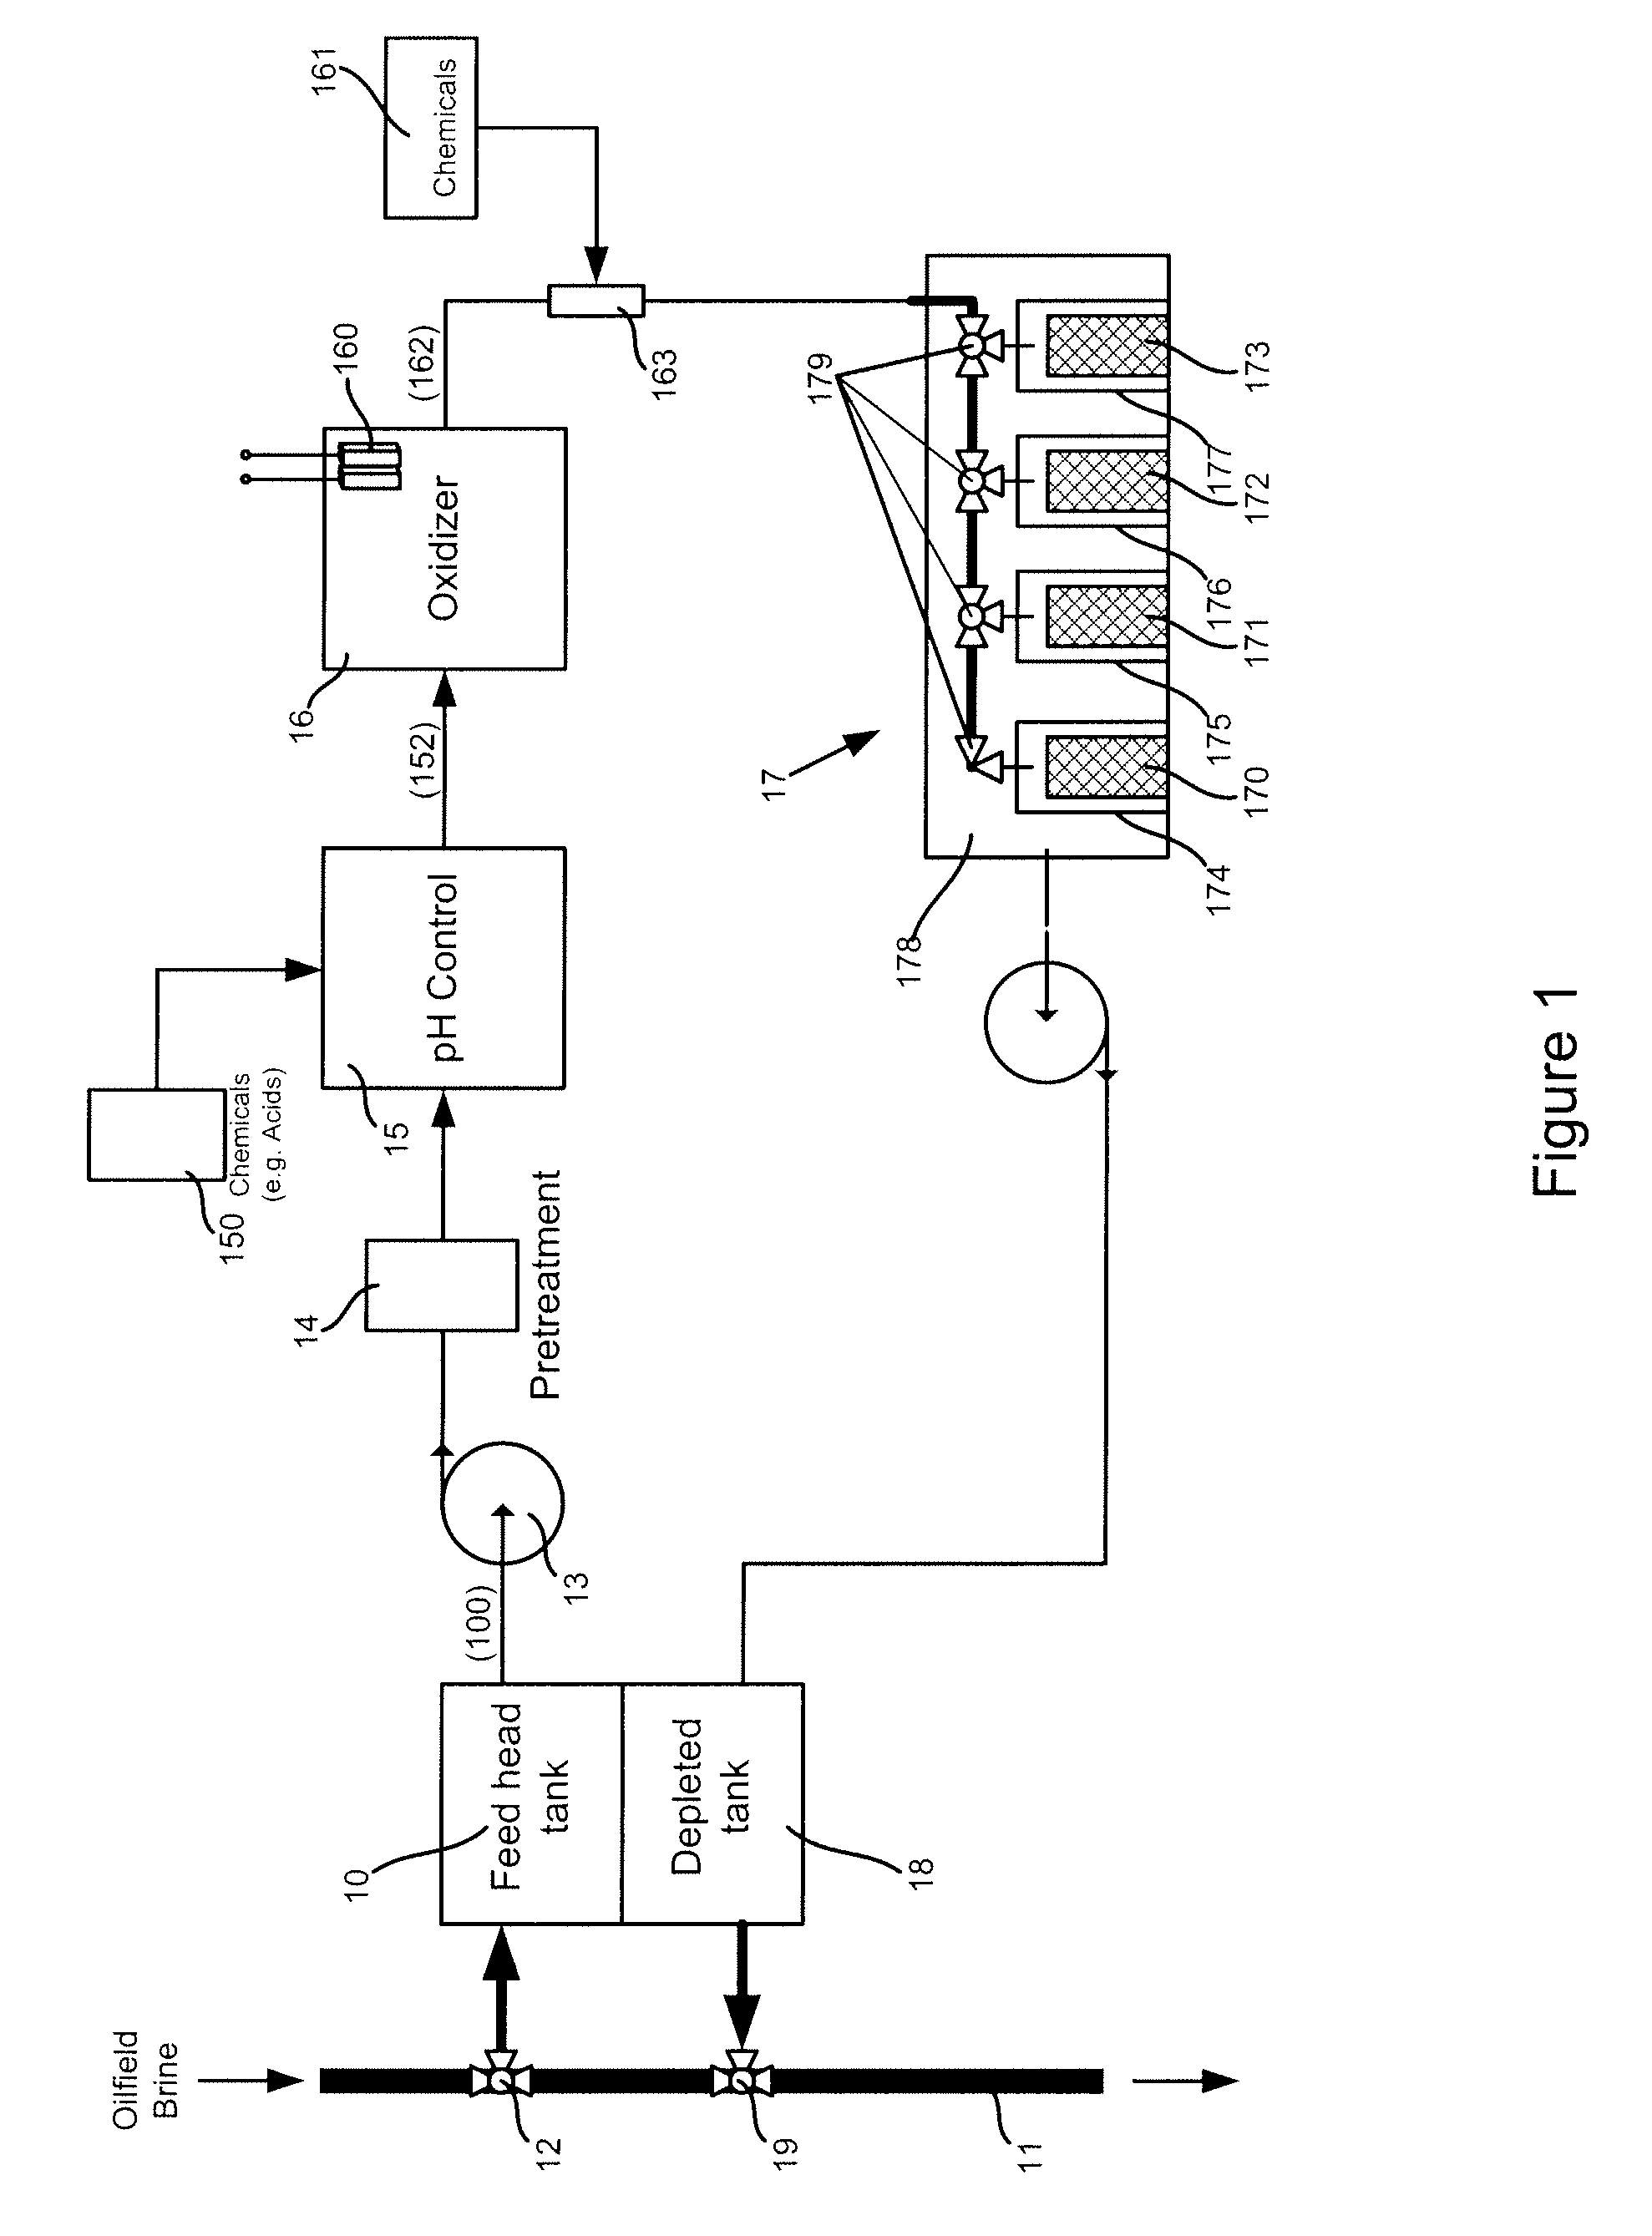 Iodine recovery systems and methods